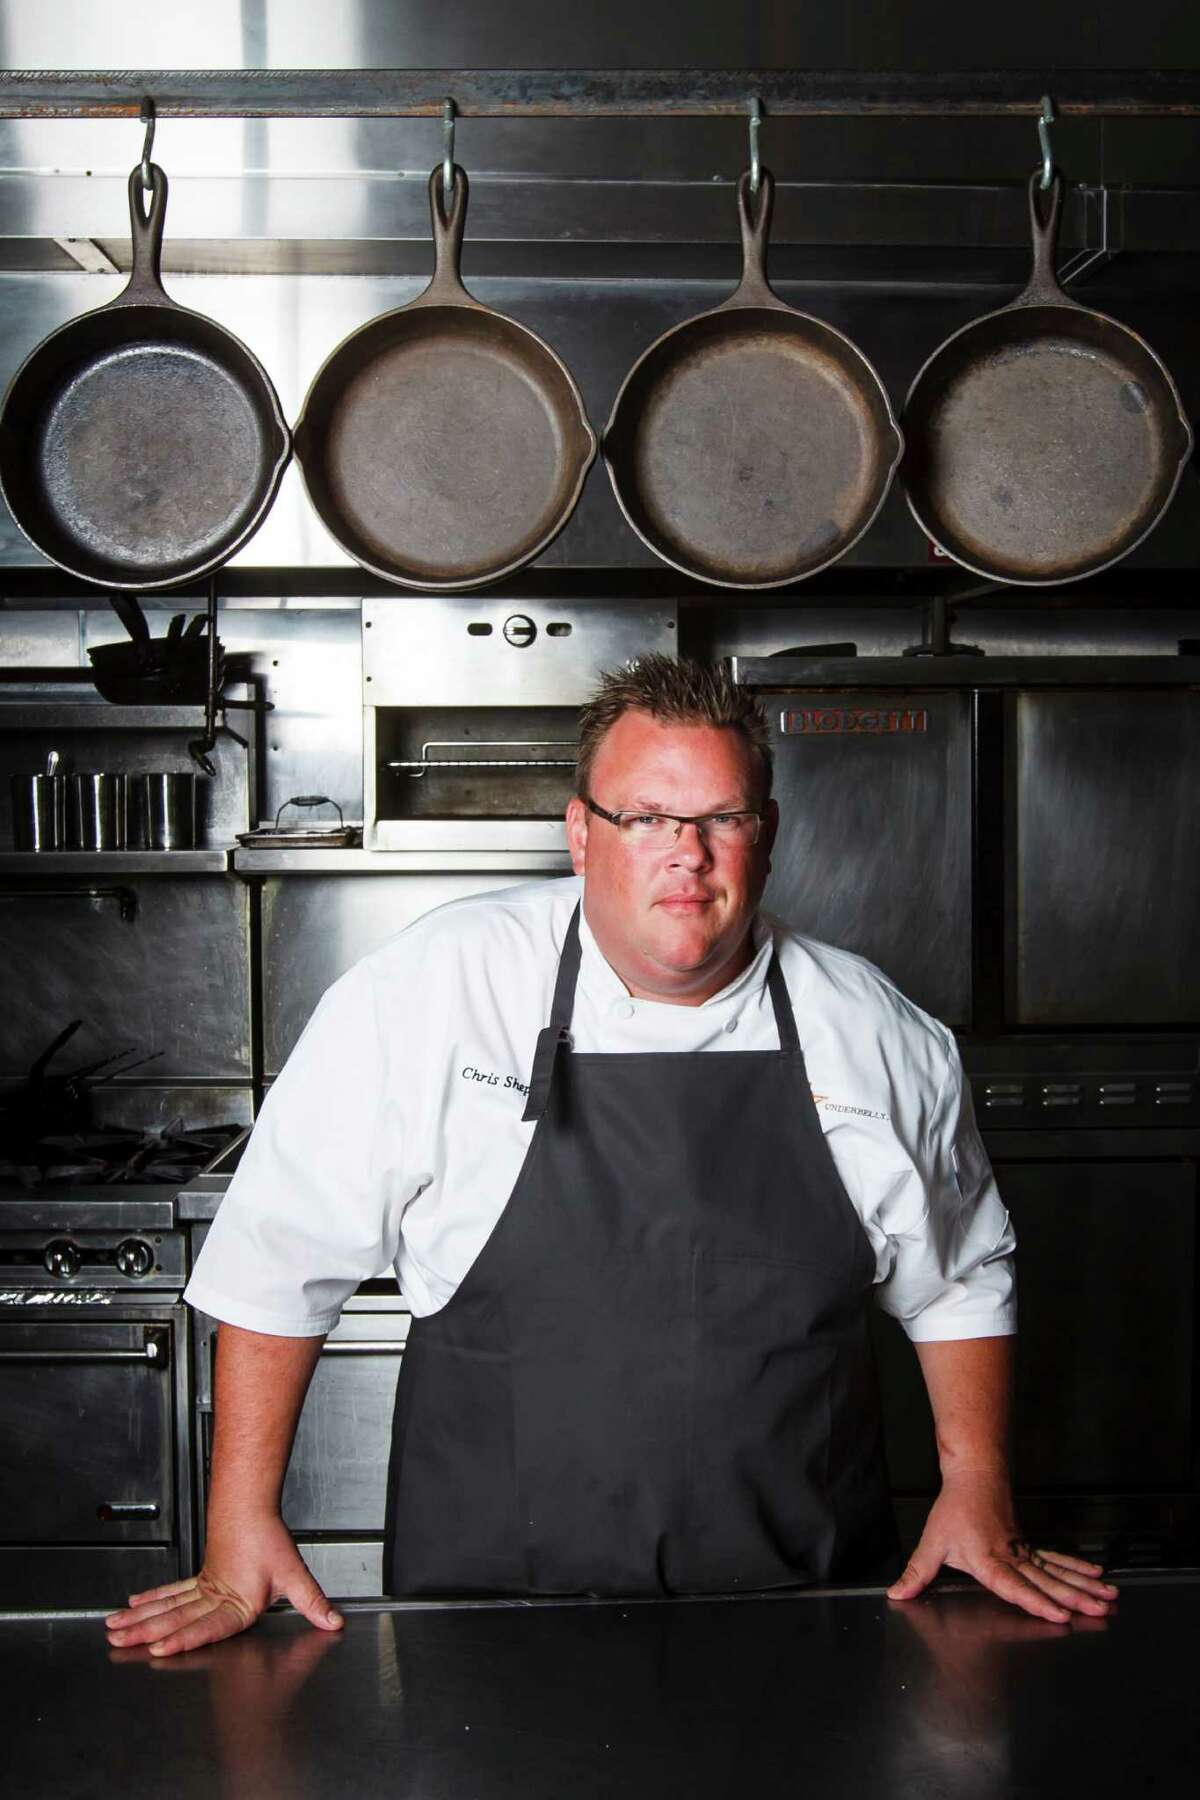 Chris Shepherd, owner and executive chef of Underbelly, poses for a portrait inside his restaurant, Friday, Sept. 21, 2012, in Houston. ( Michael Paulsen / Houston Chronicle )